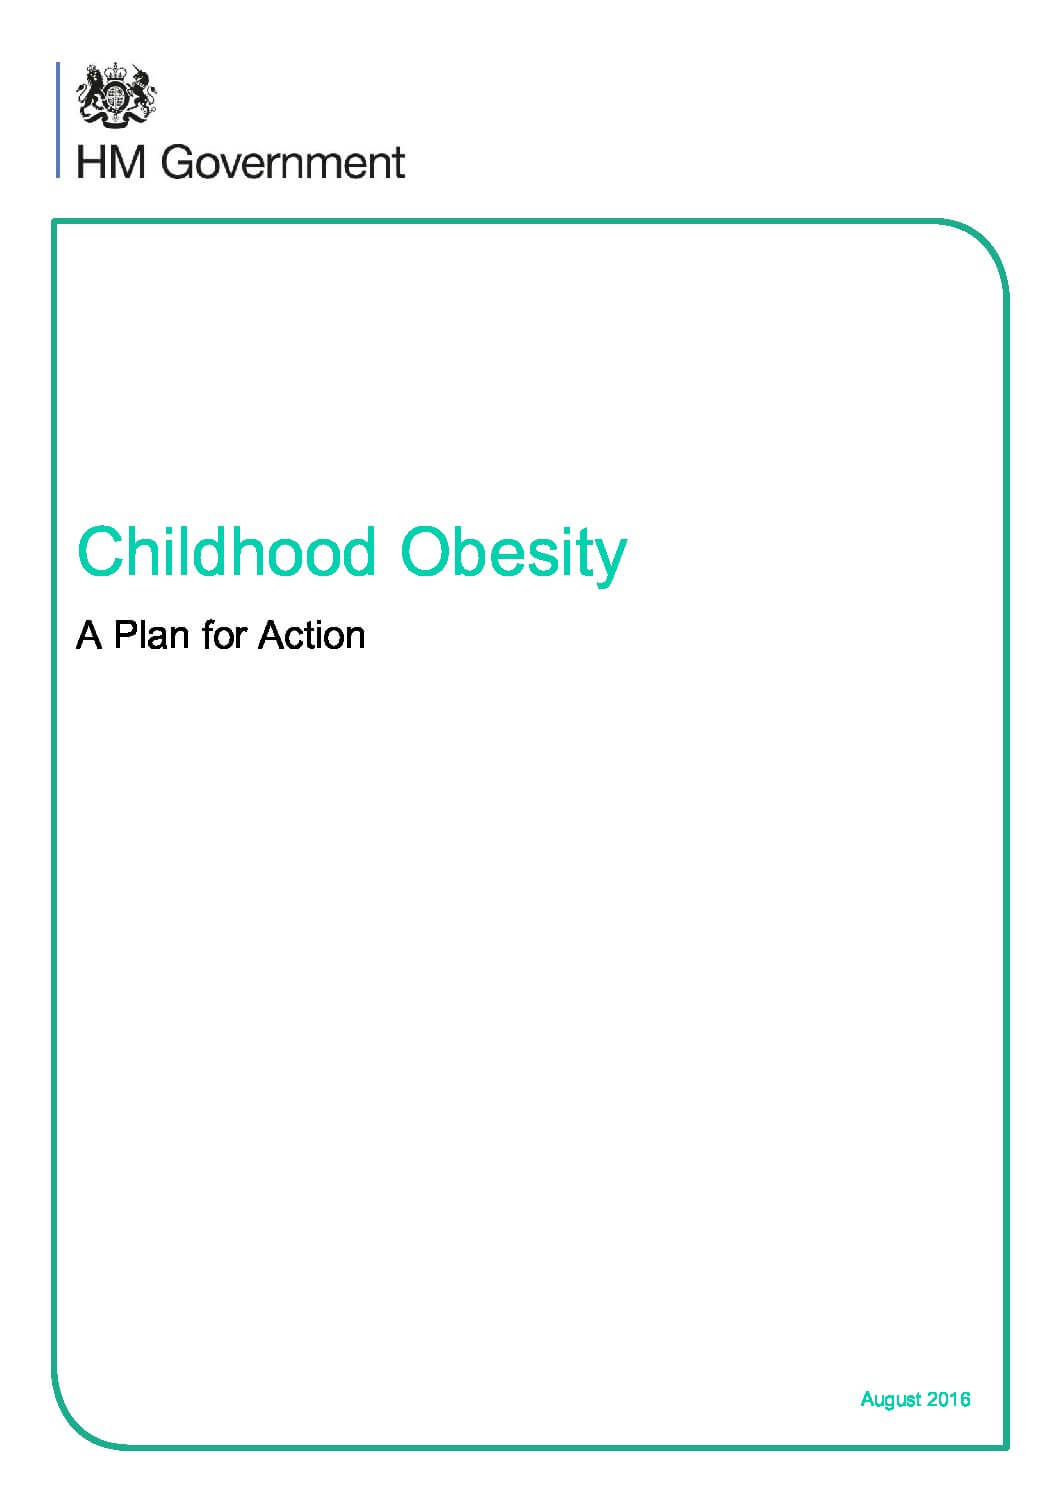 Childhood Obesity – A Plan for Action